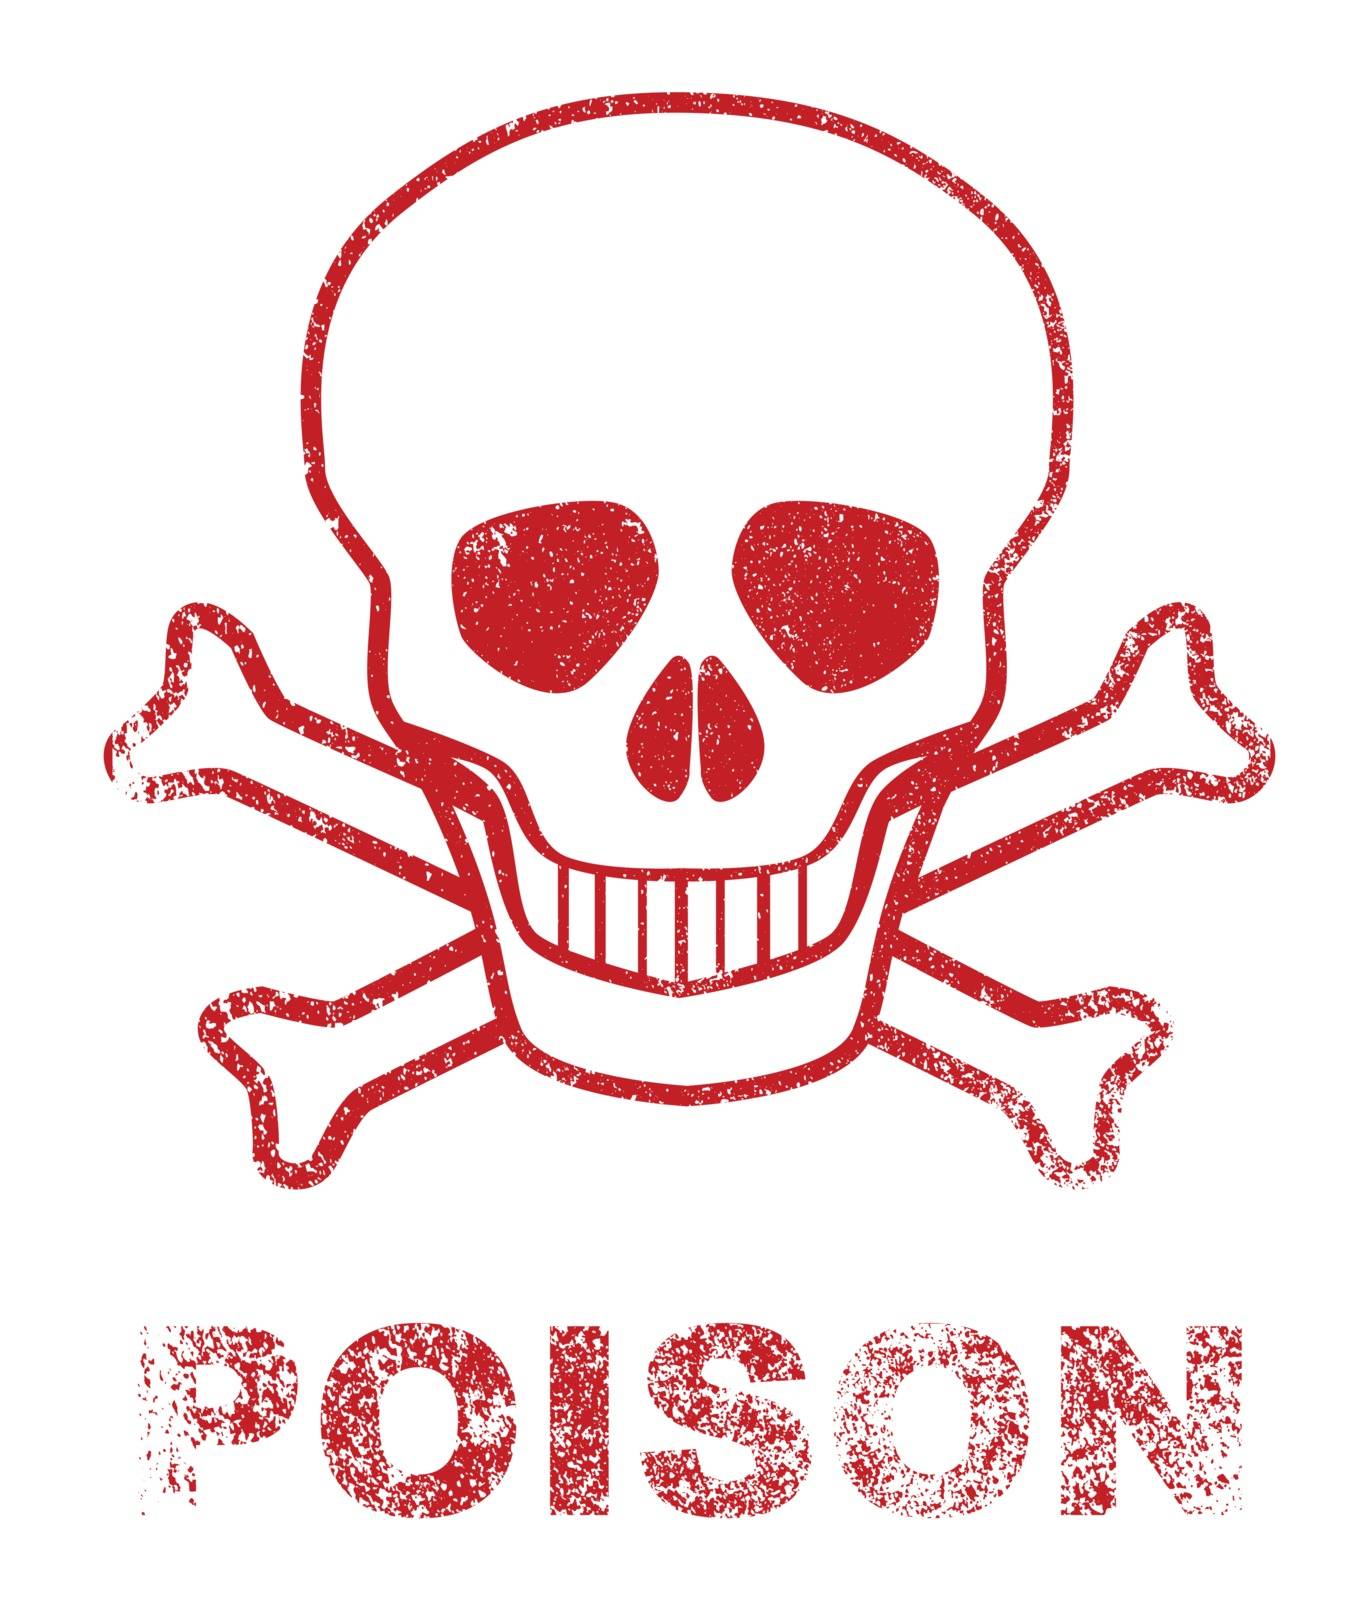 Skull and crossbones poison sign as a red ink stamp